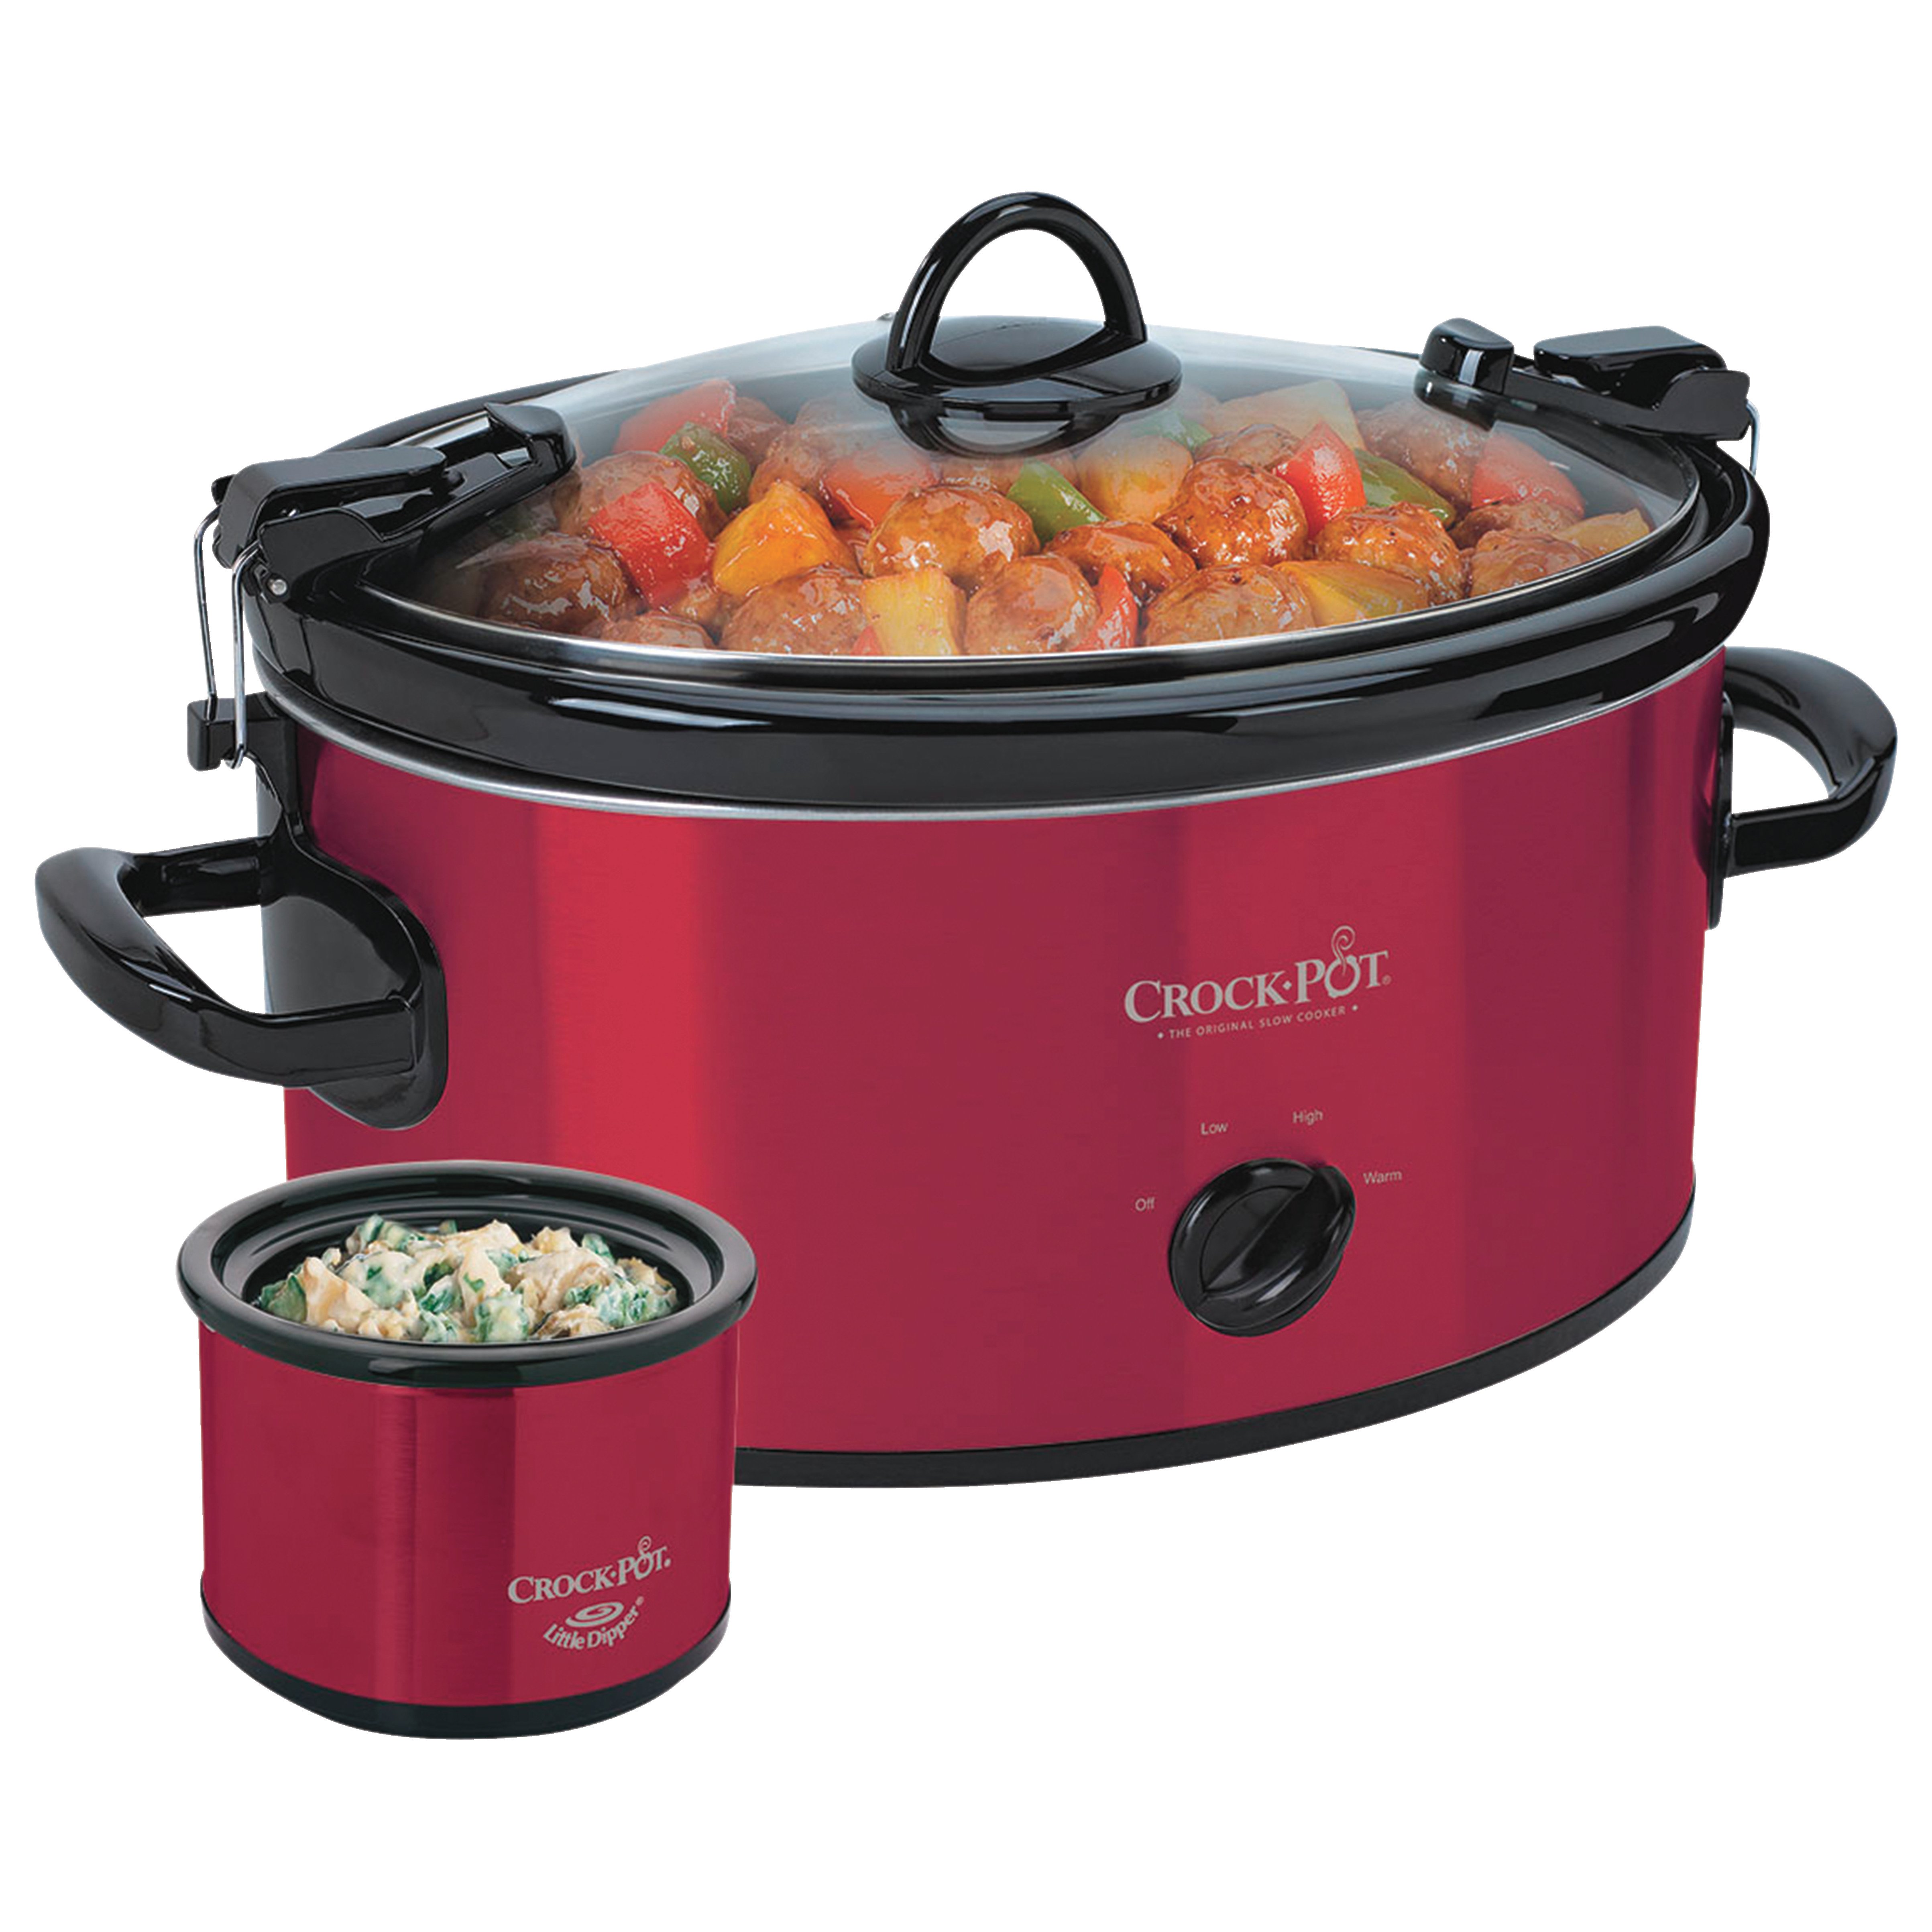 our goods Slow Cooker - Stainless Steel - Shop Cookers & Roasters at H-E-B